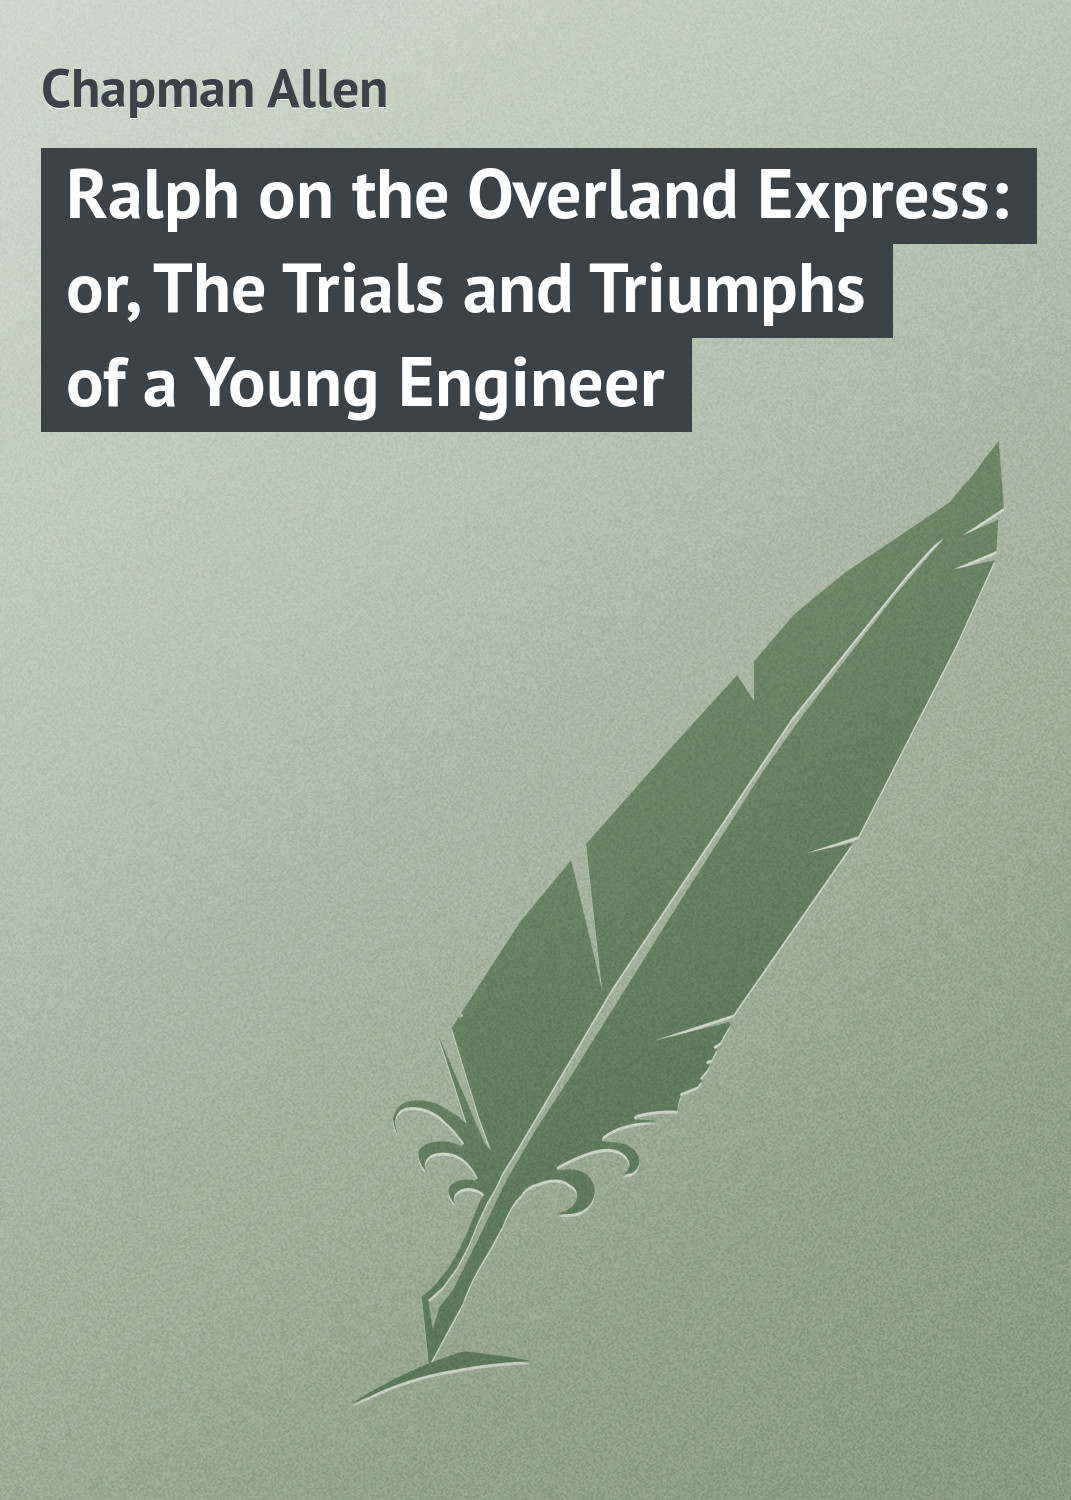 Ralph on the Overland Express: or, The Trials and Triumphs of a Young Engineer